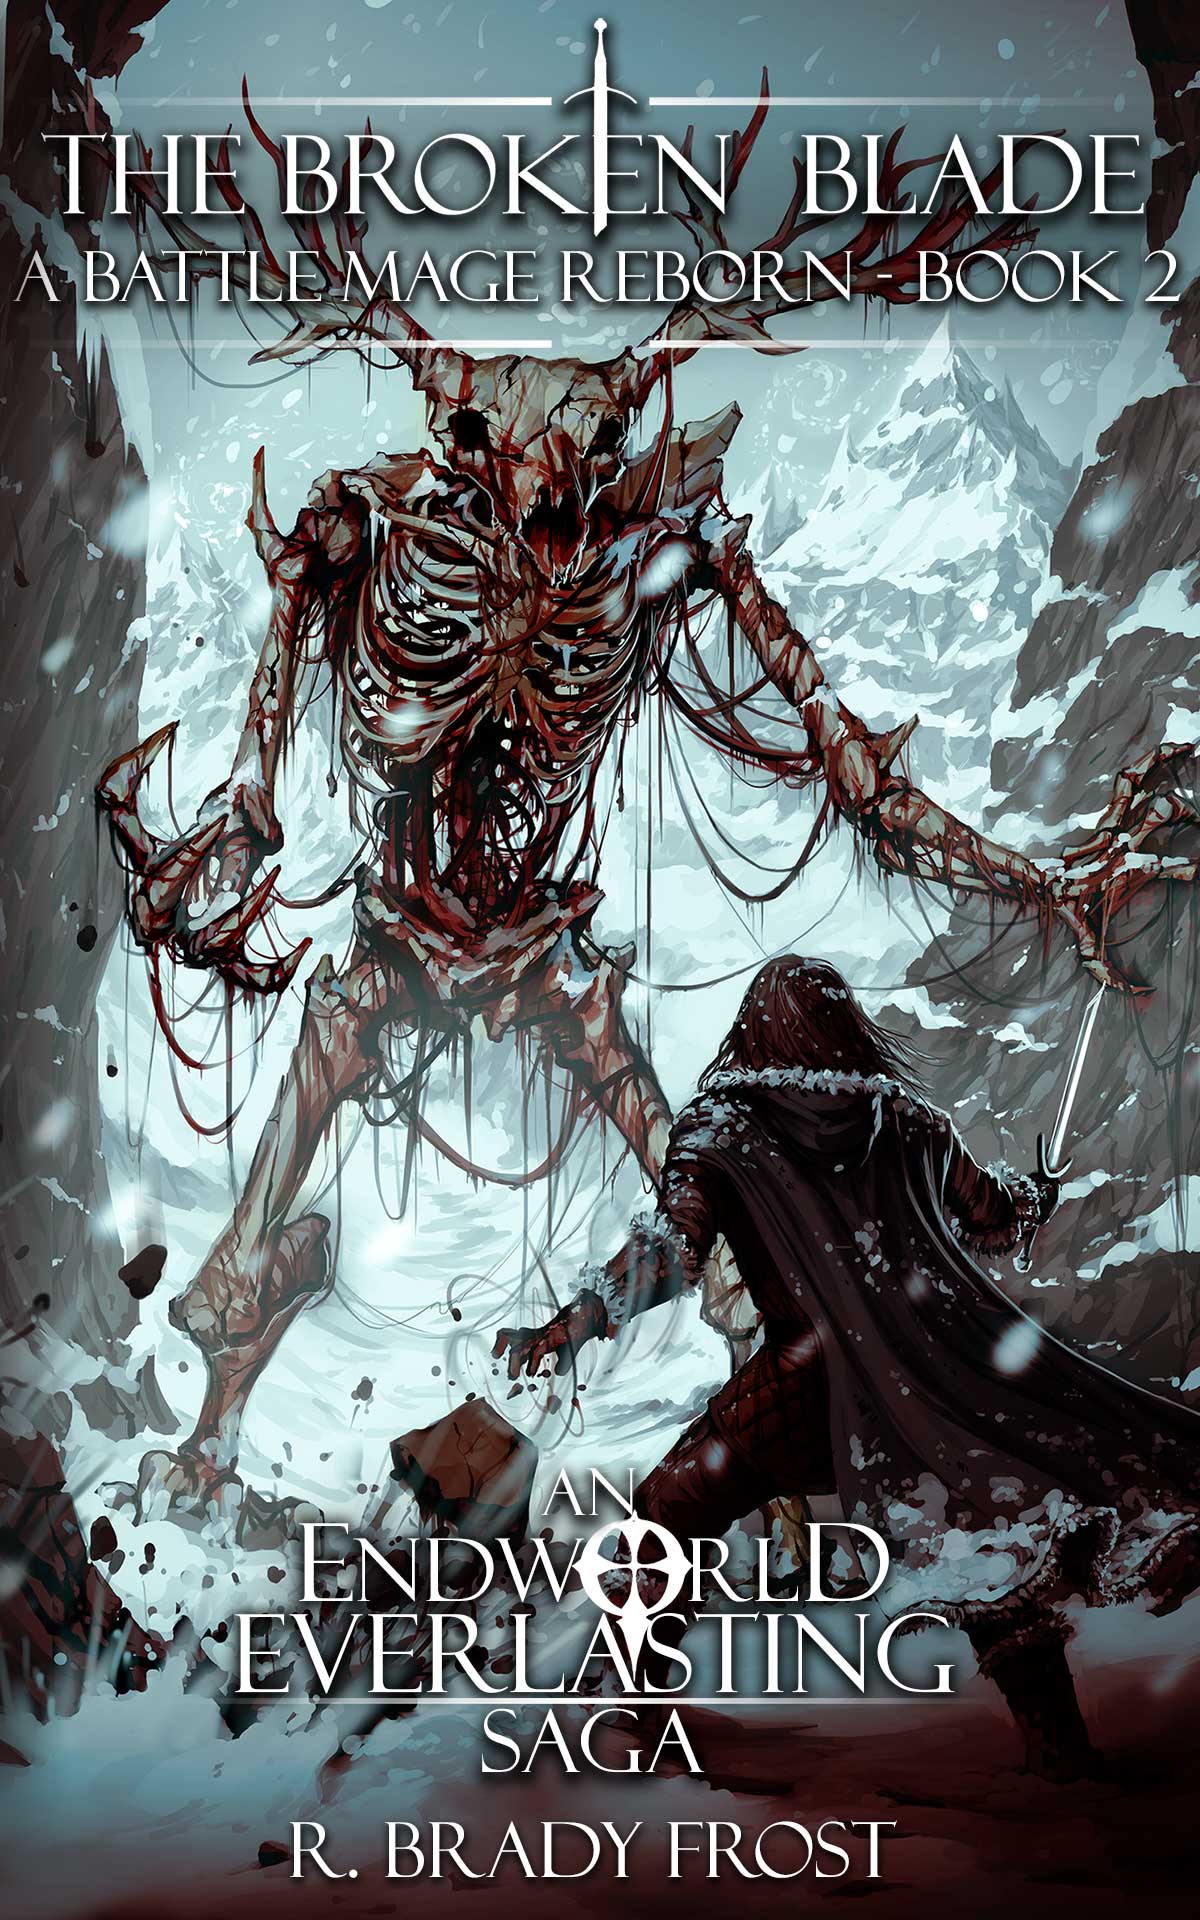 Denton faces off against a Prime Wendigo in the Frostwind Mountains - ebook cover for The Broken Blade